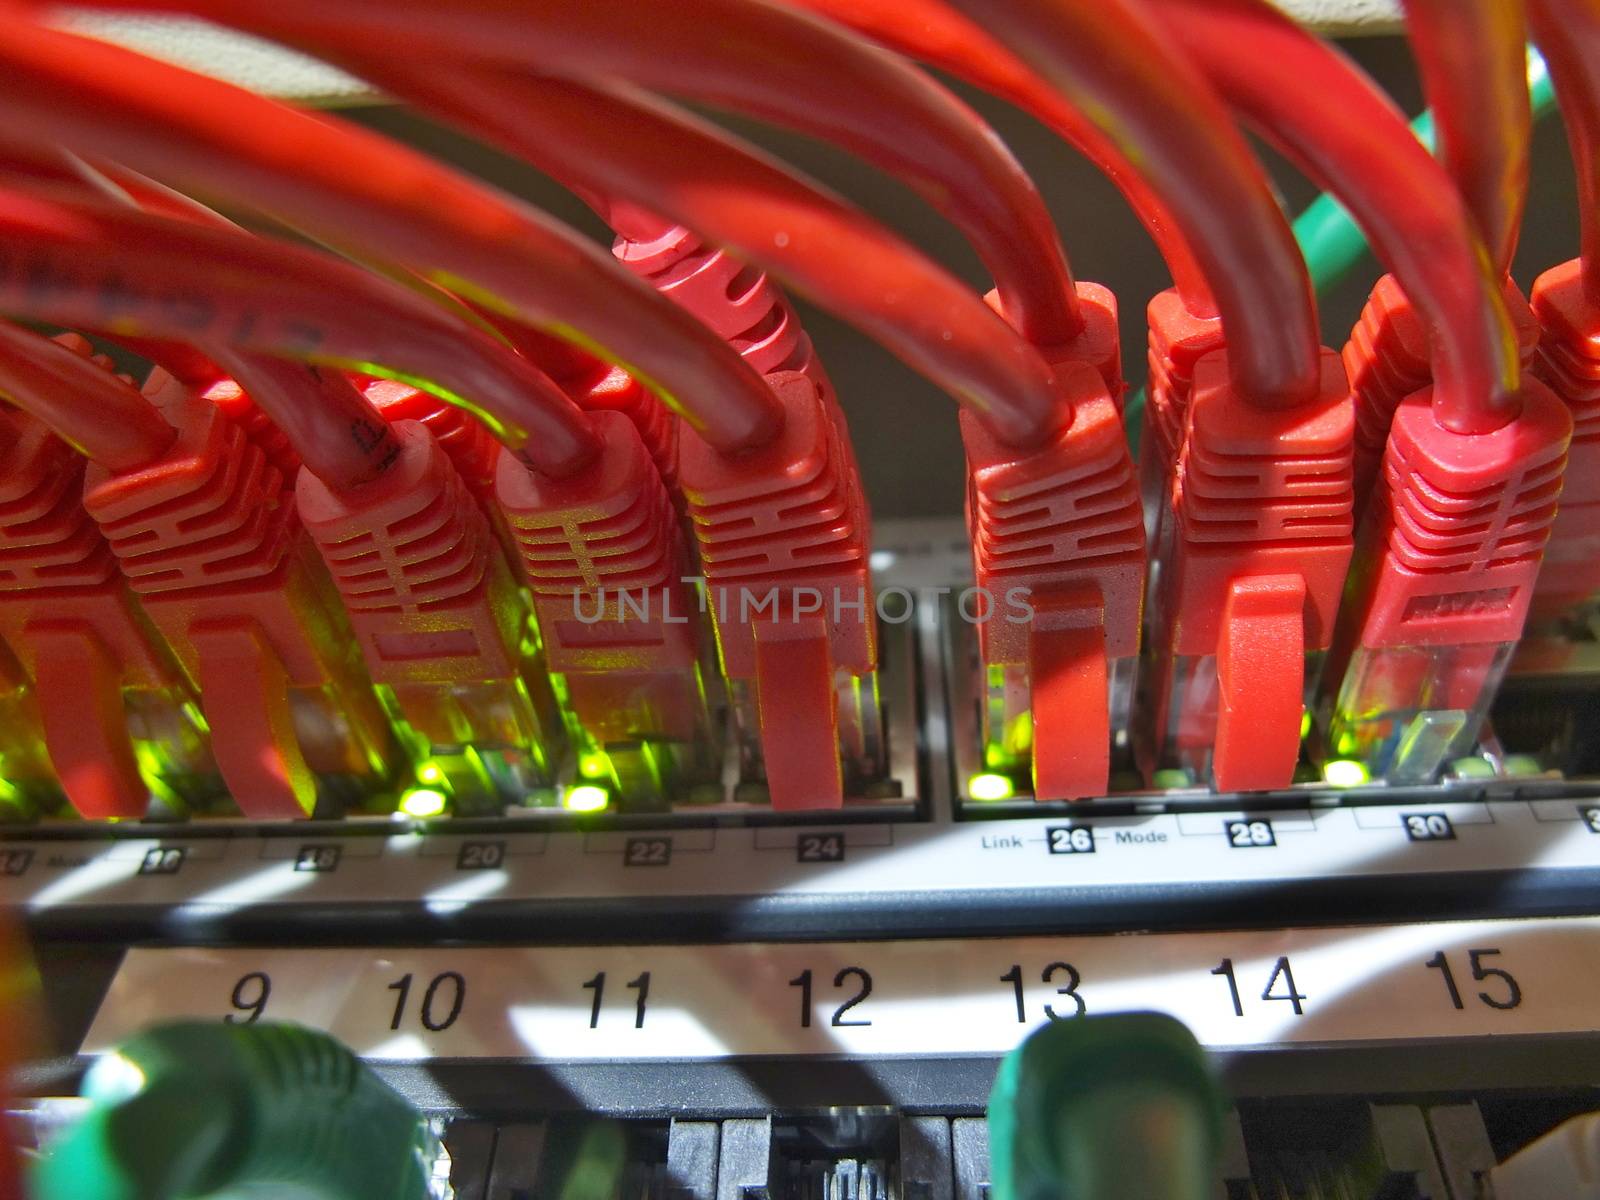 Network Cables connected to server with LED signalization